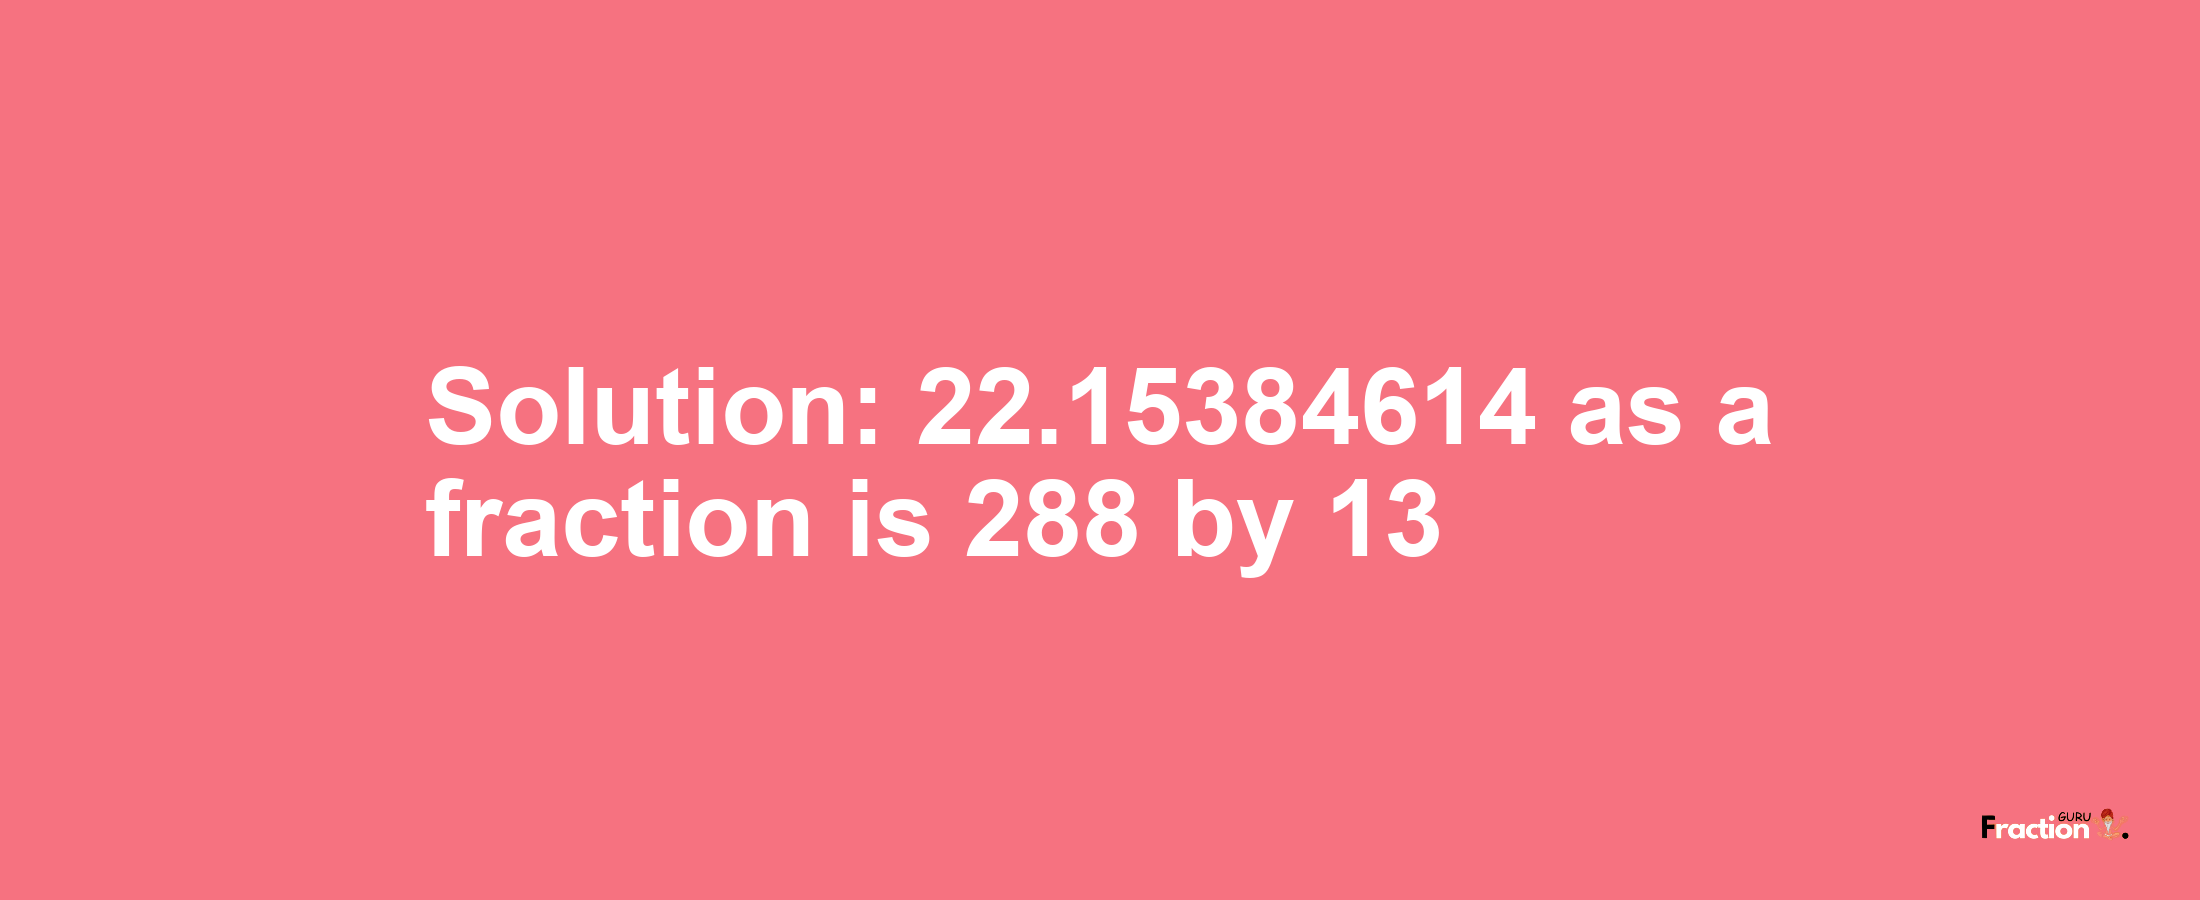 Solution:22.15384614 as a fraction is 288/13